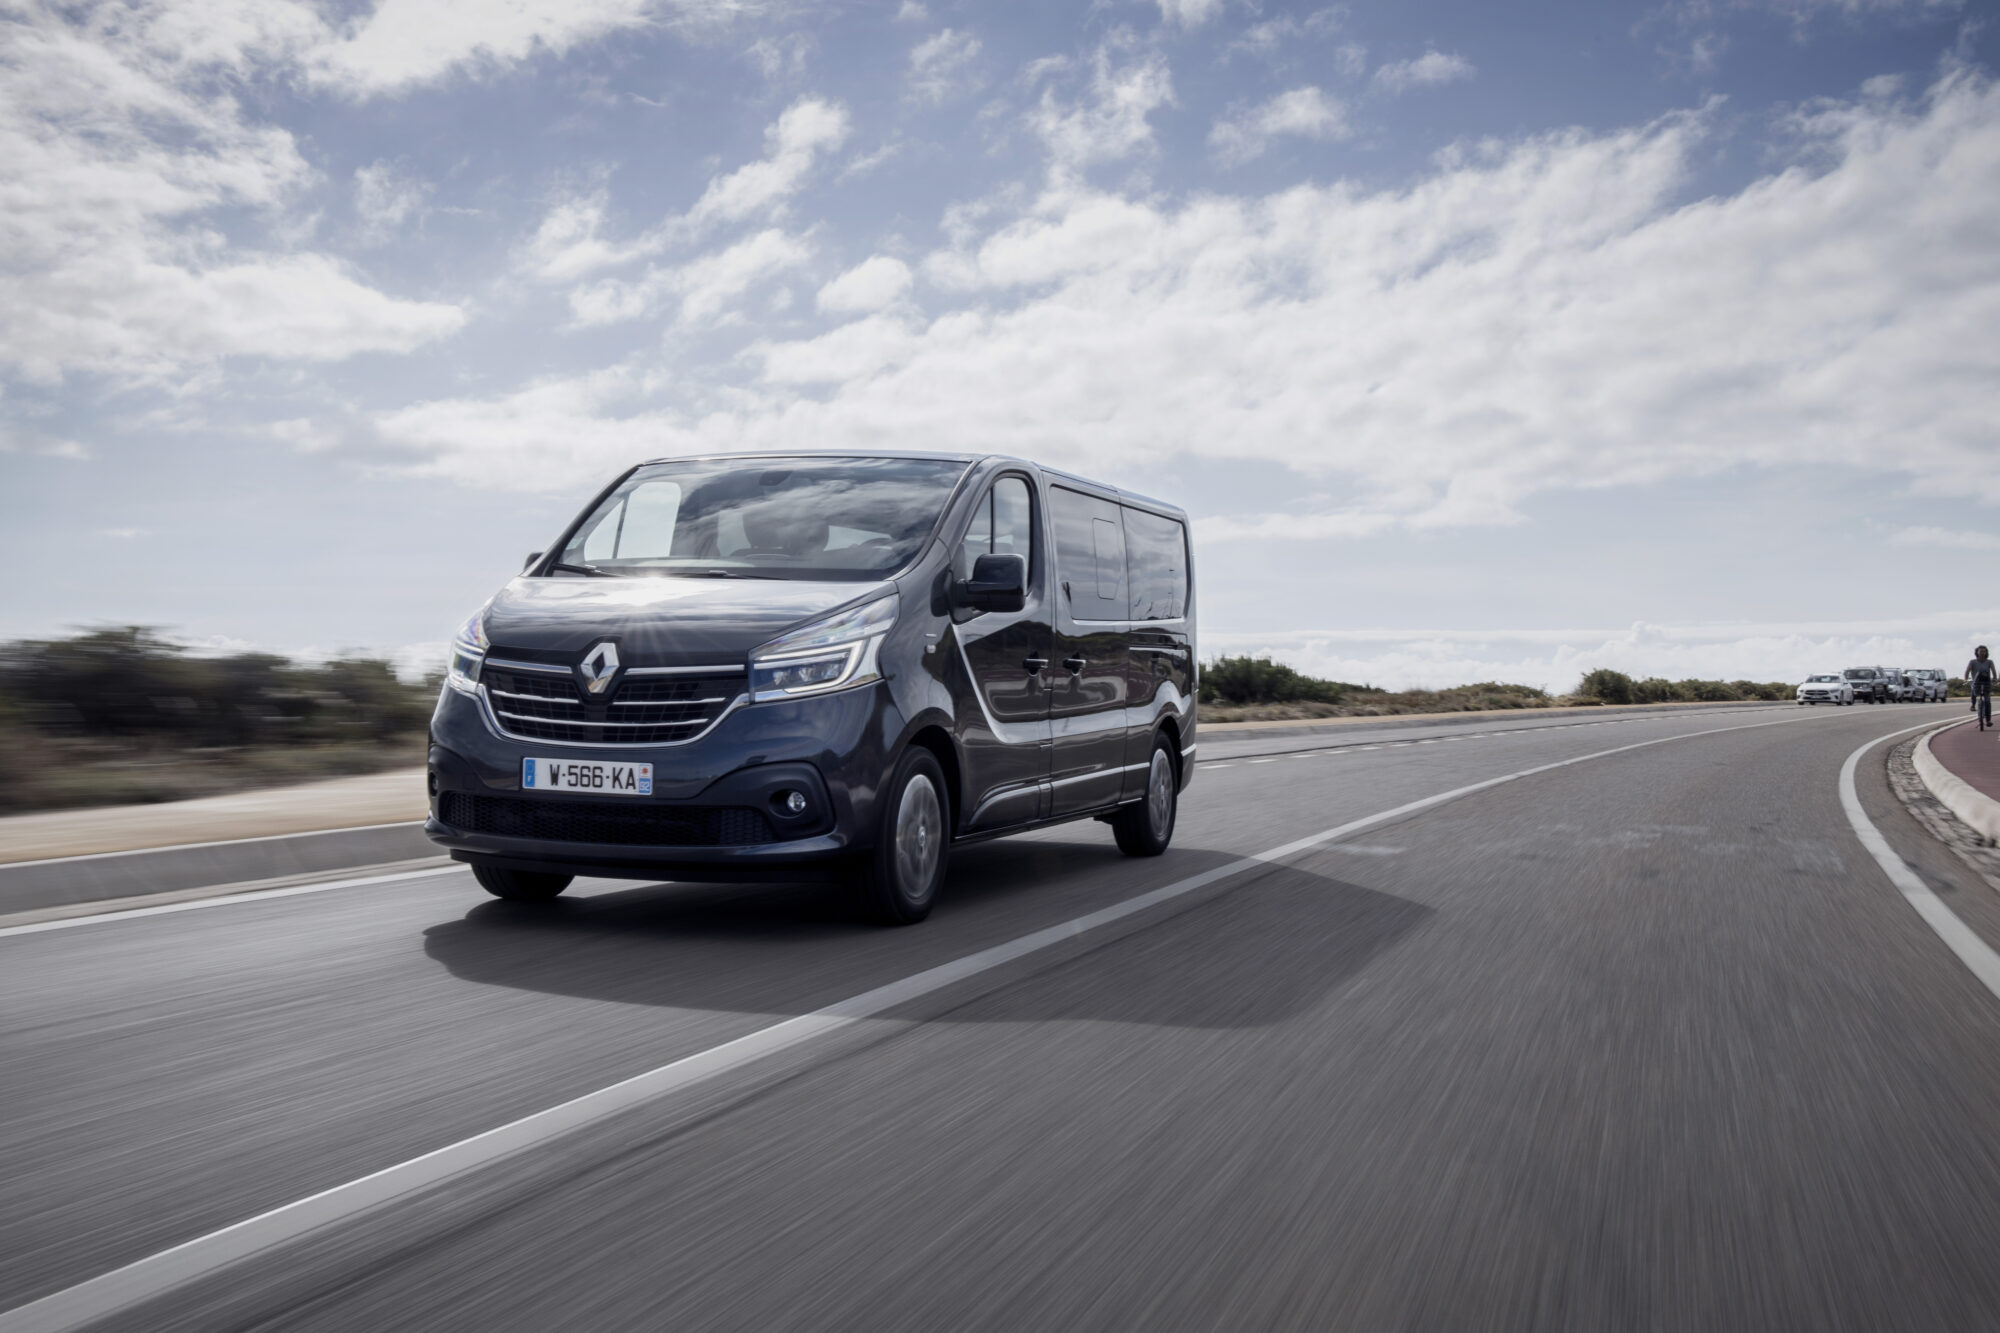 2019 - New Renault TRAFIC SpaceClass press tests in Portugal